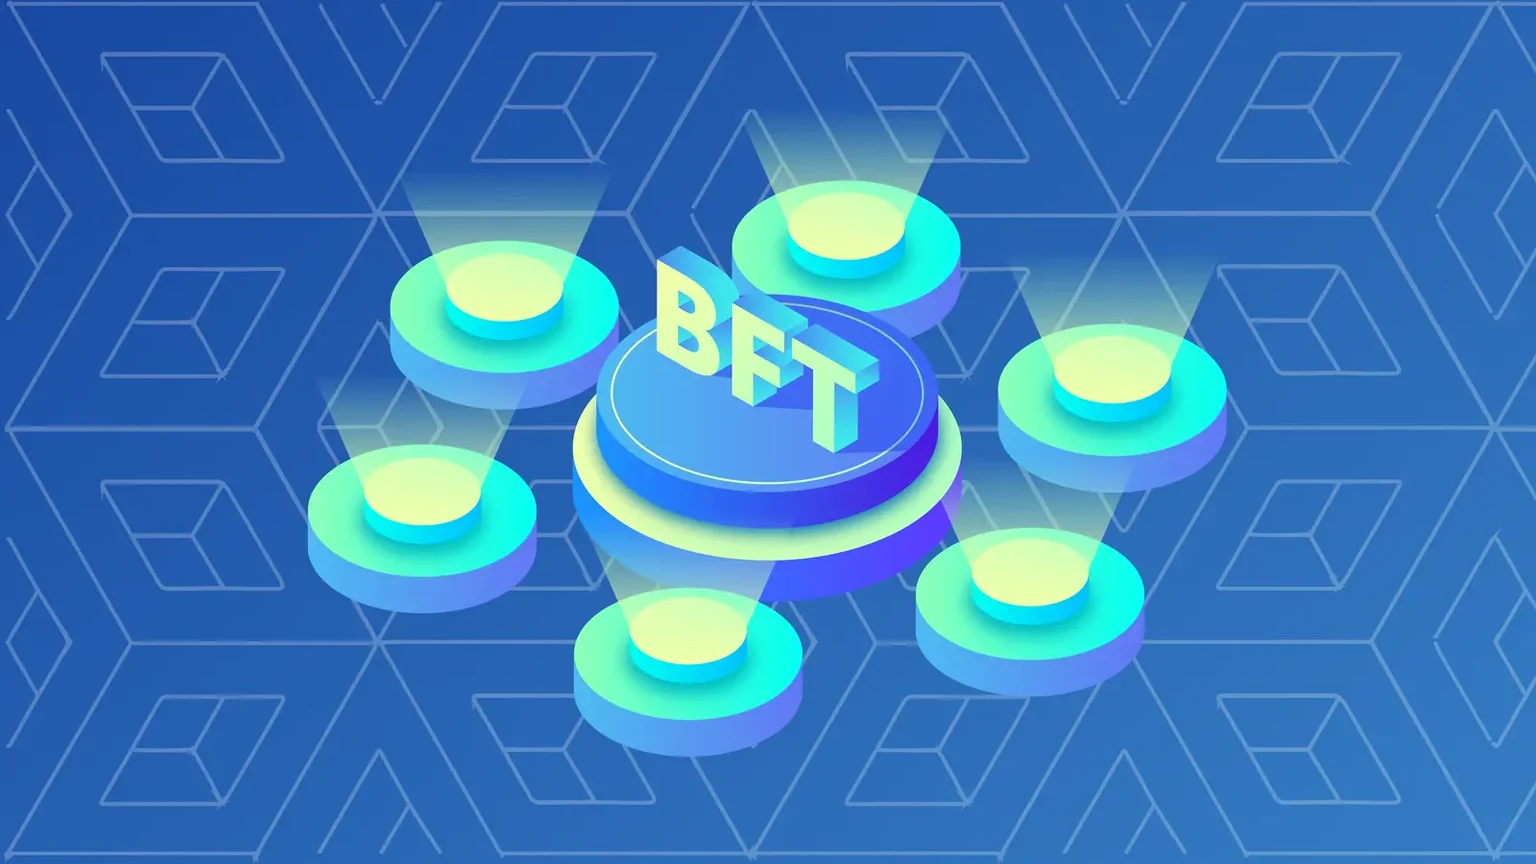 Byzantine Fault Tolerance (BFT) is one of the fundamental properties of reliable blockchain rules or protocols